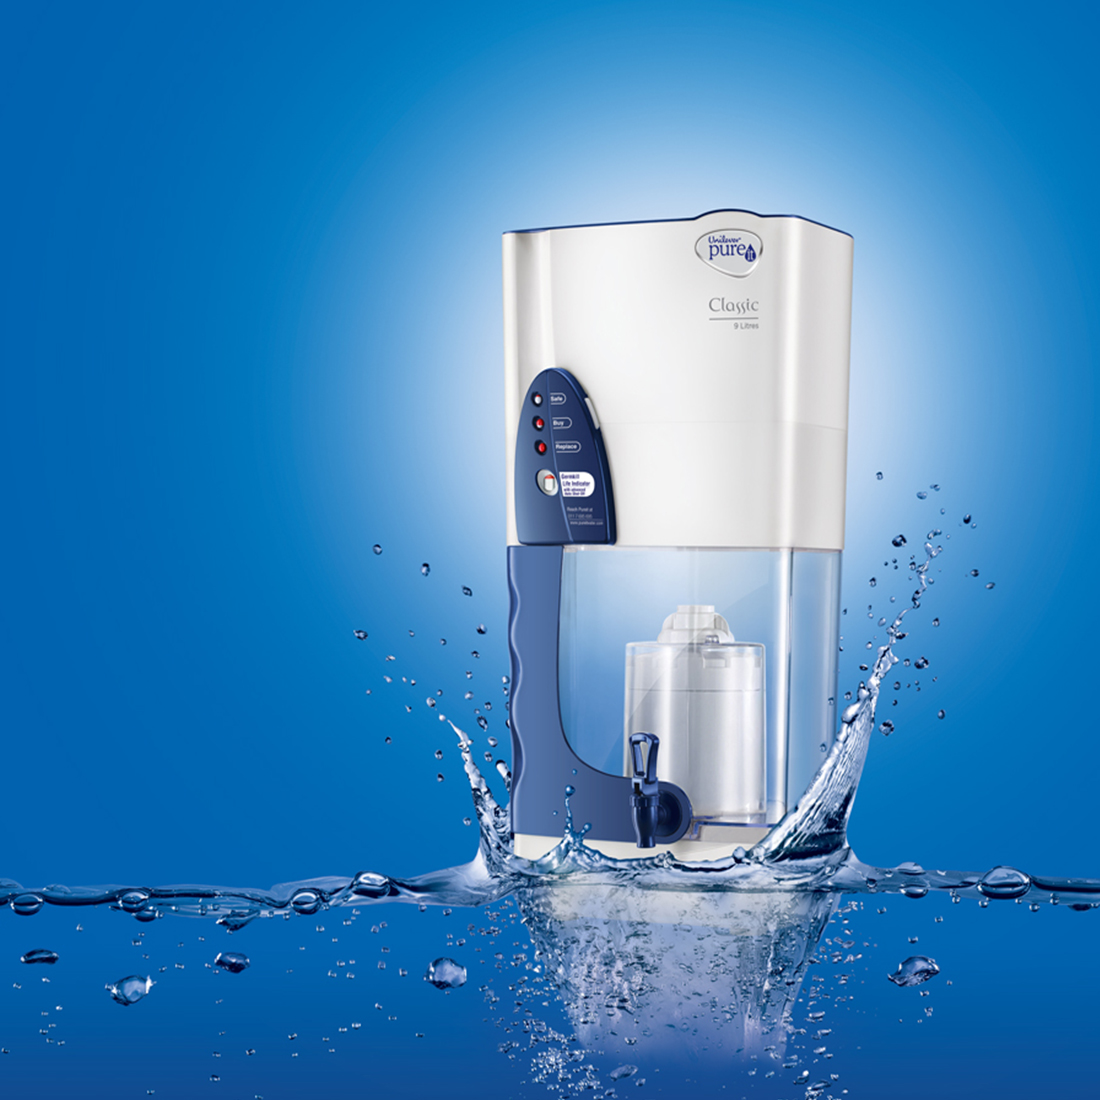 How Long Time does Pureit Classic Takes to Purify Water - BD Water Purifier